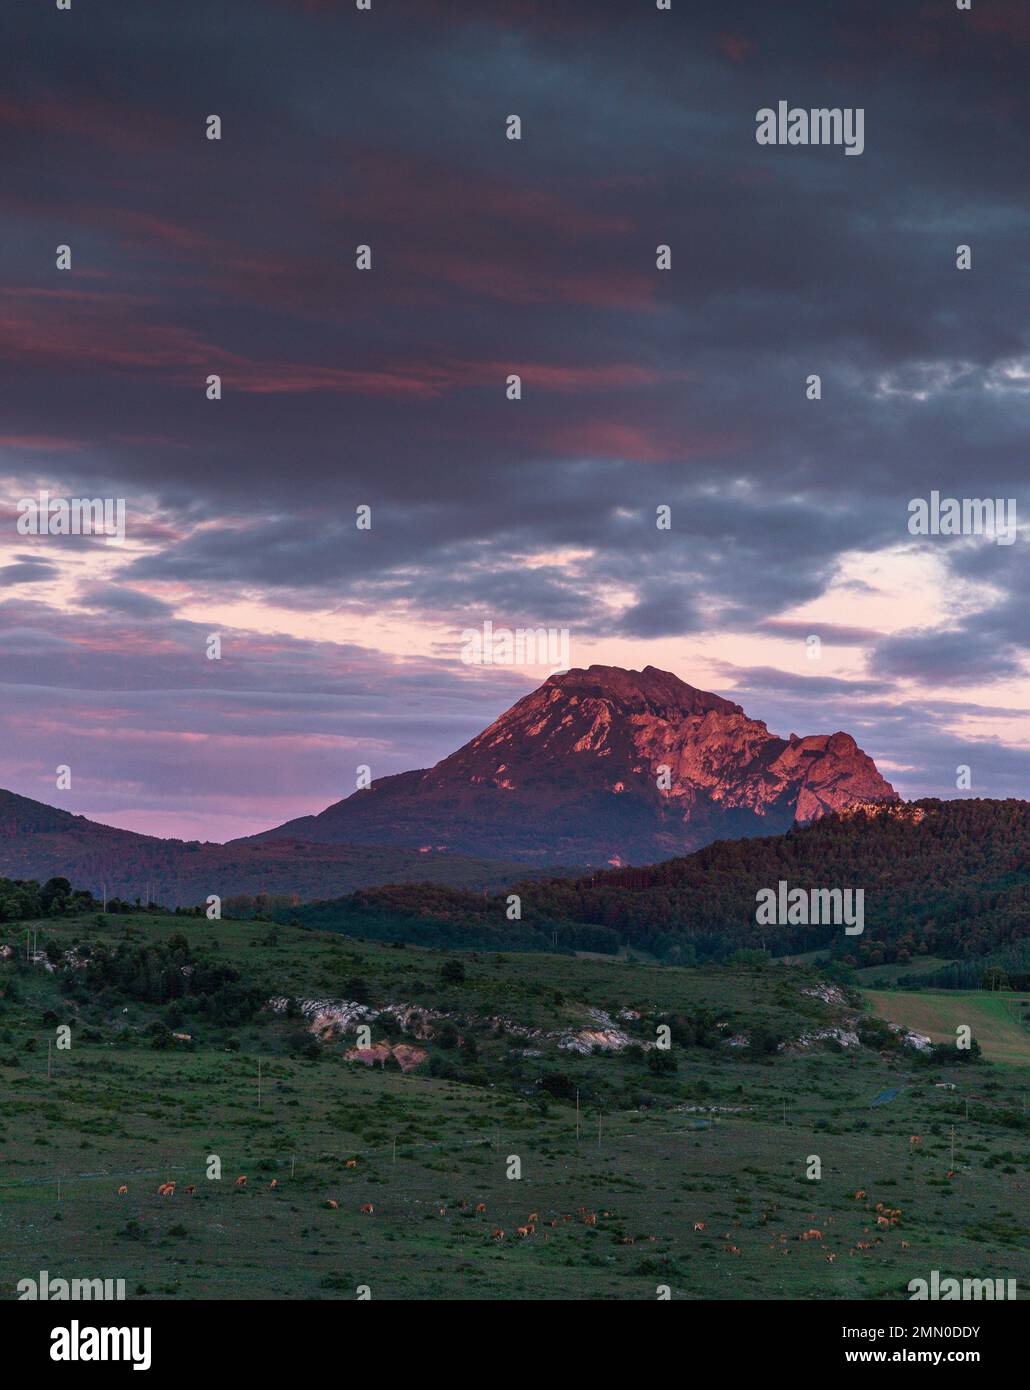 France, Aude, Rennes le Chateau, Mont Bugarach, mountain lit by the last rays of the sun under a cloudy sky Stock Photo